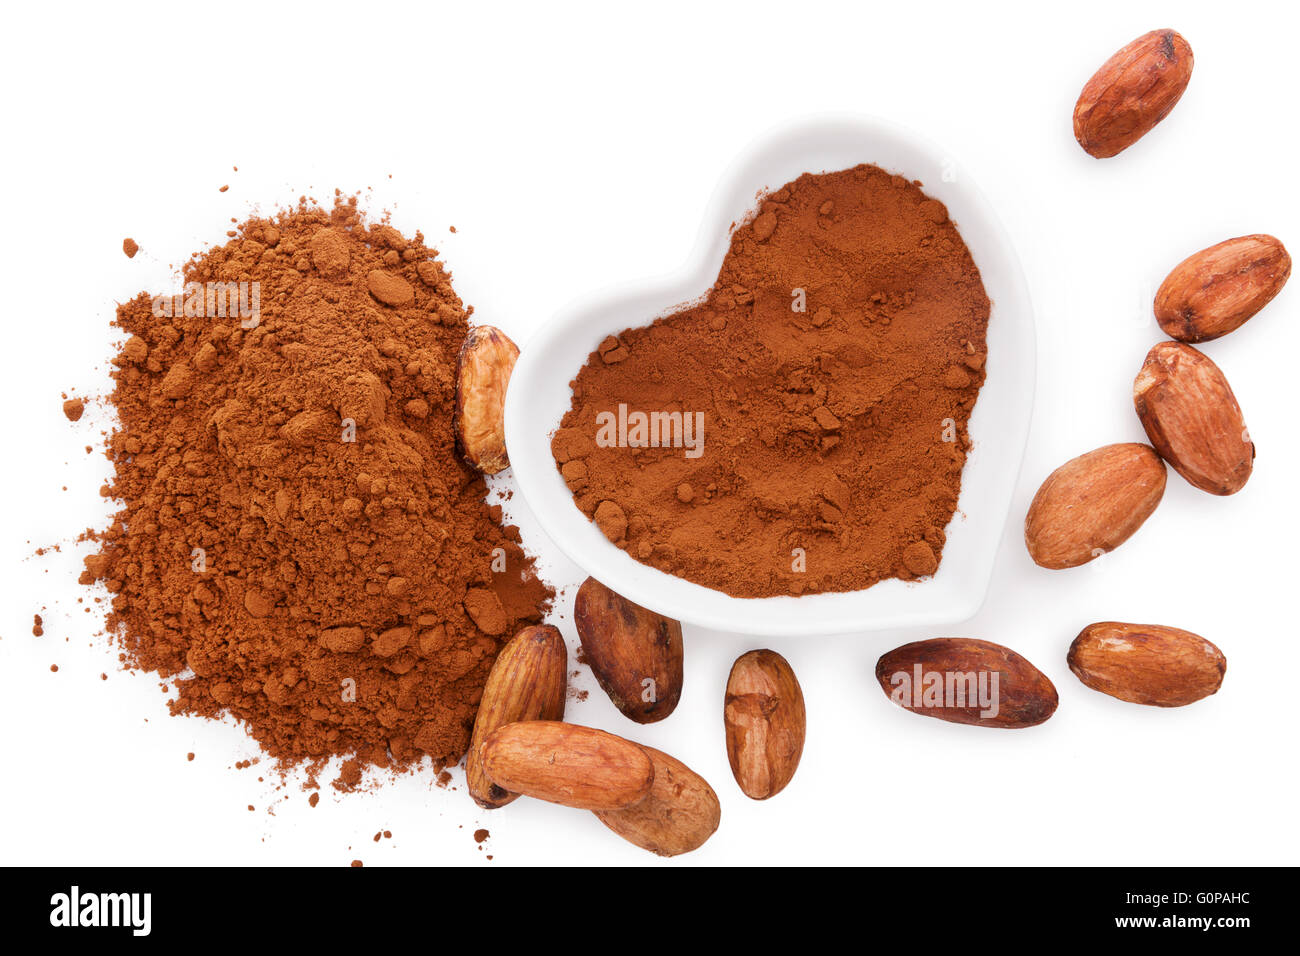 Cocoa beans and cocoa powder on white background, flat lay. Healthy superfood. Stock Photo